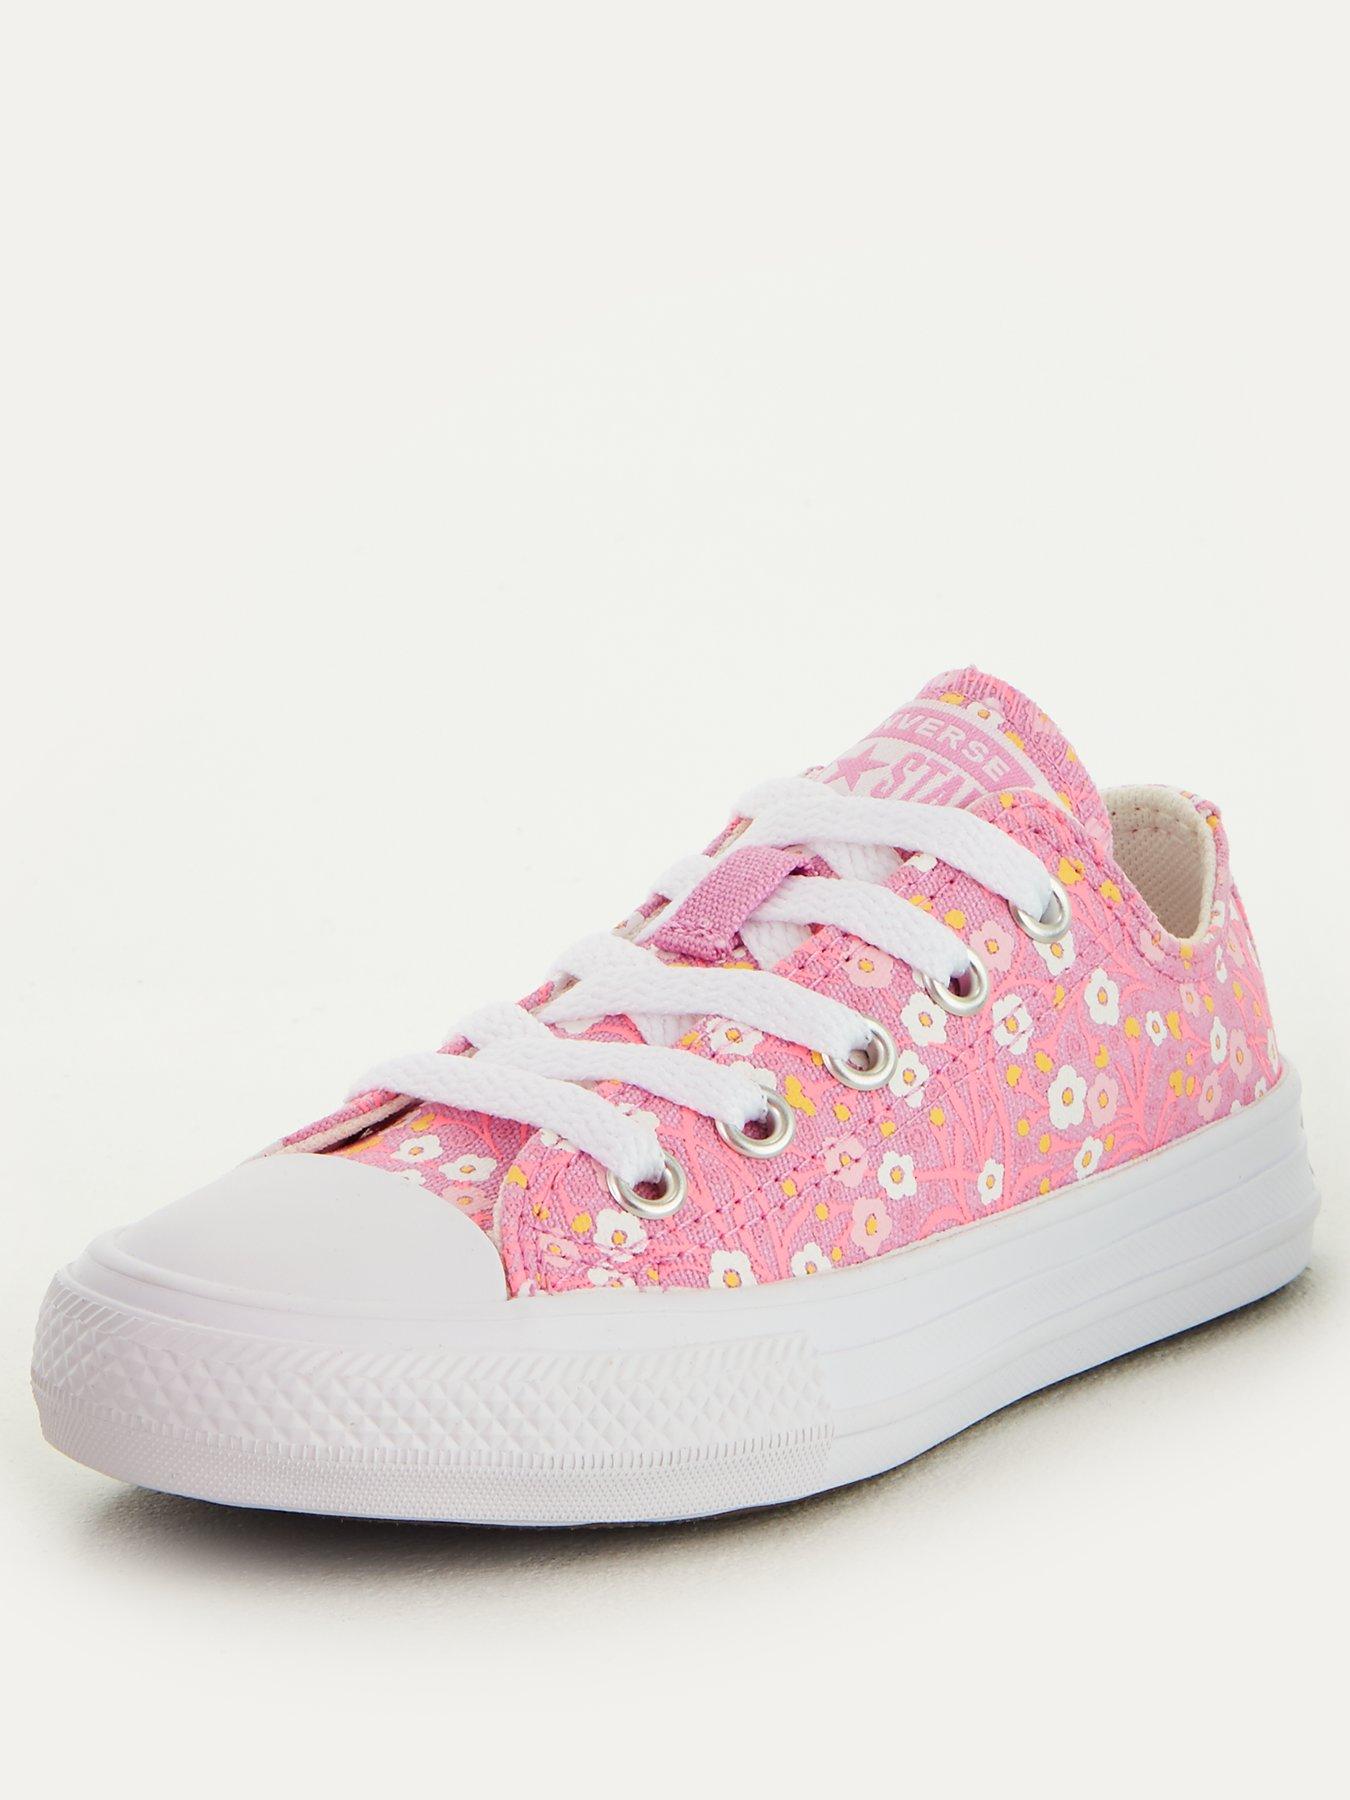 converse all star ox floral